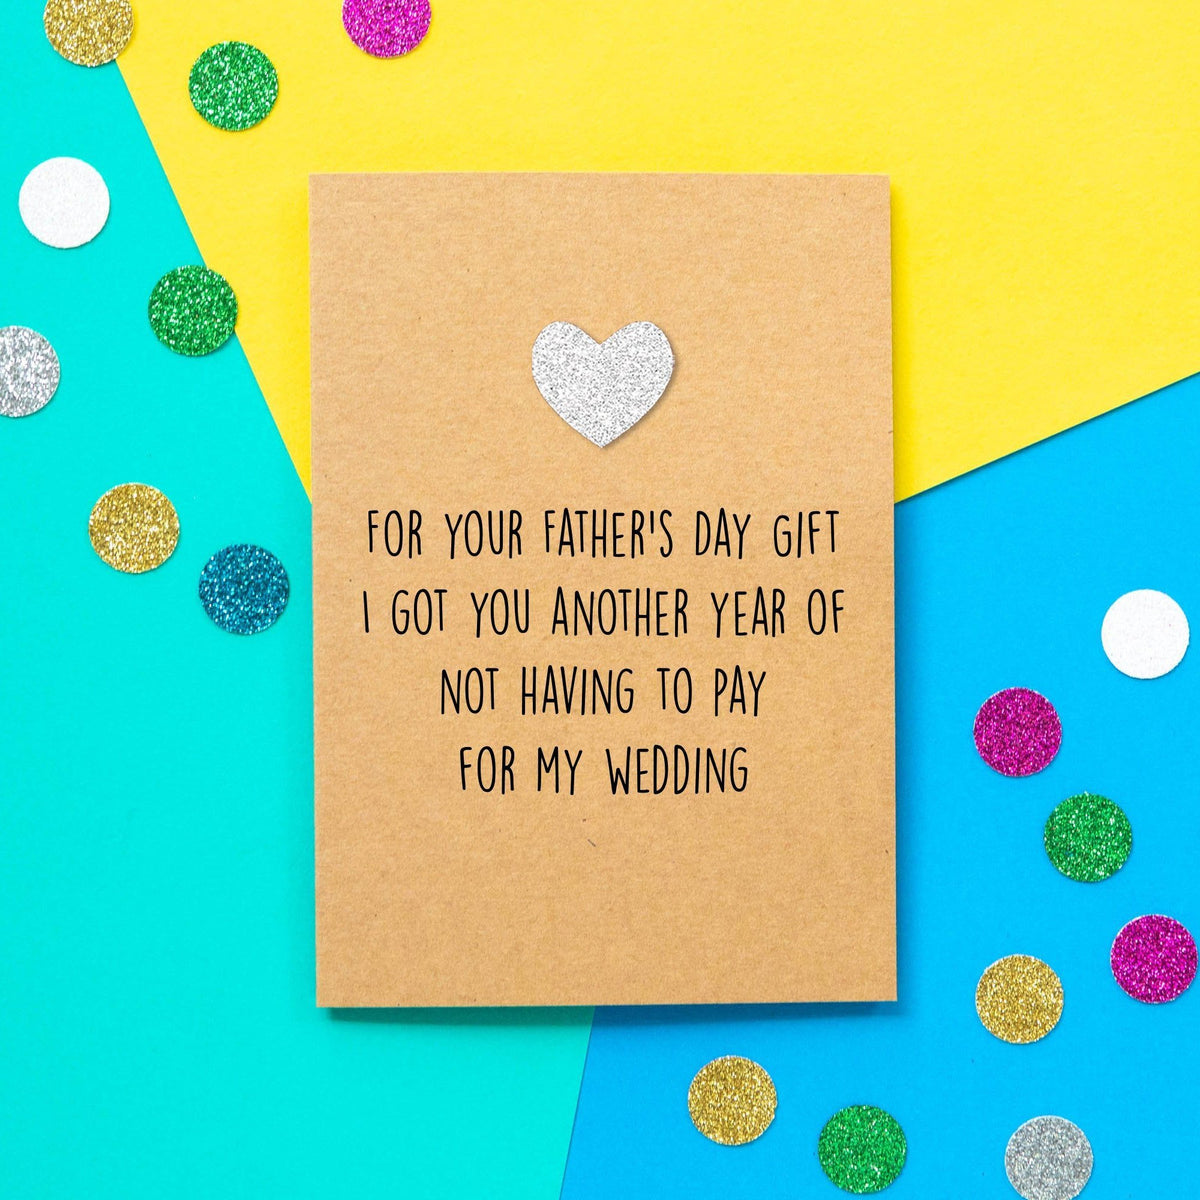 Funny Father's day card | For your Father's Day Gift, I got you another year of not having to pay for my wedding. - Bettie Confetti